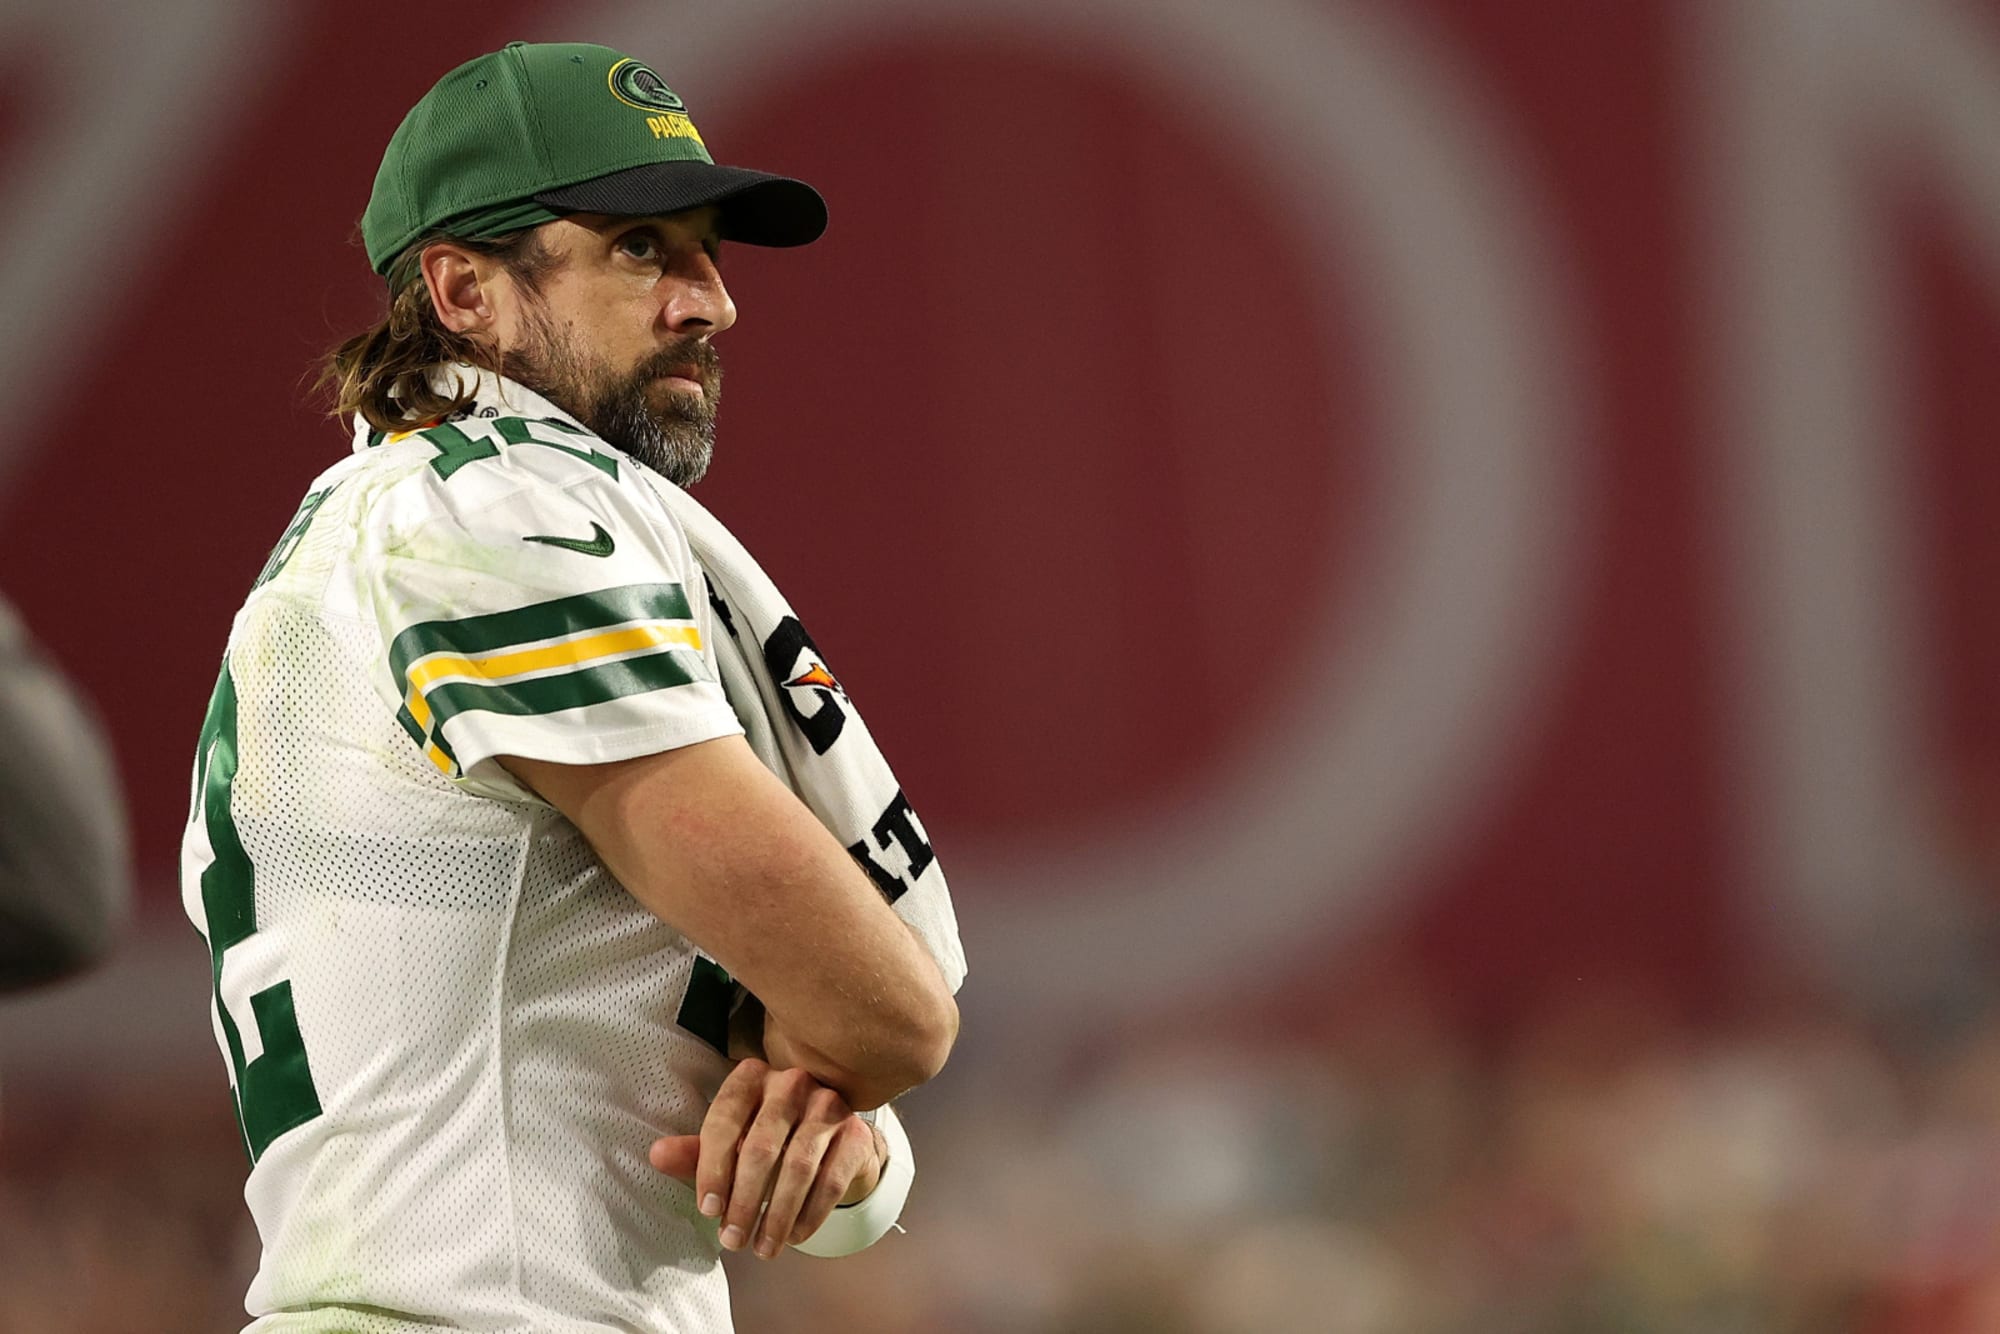 One ESPN writer has crazy idea for Jets to pursue if Aaron Rodgers falls through